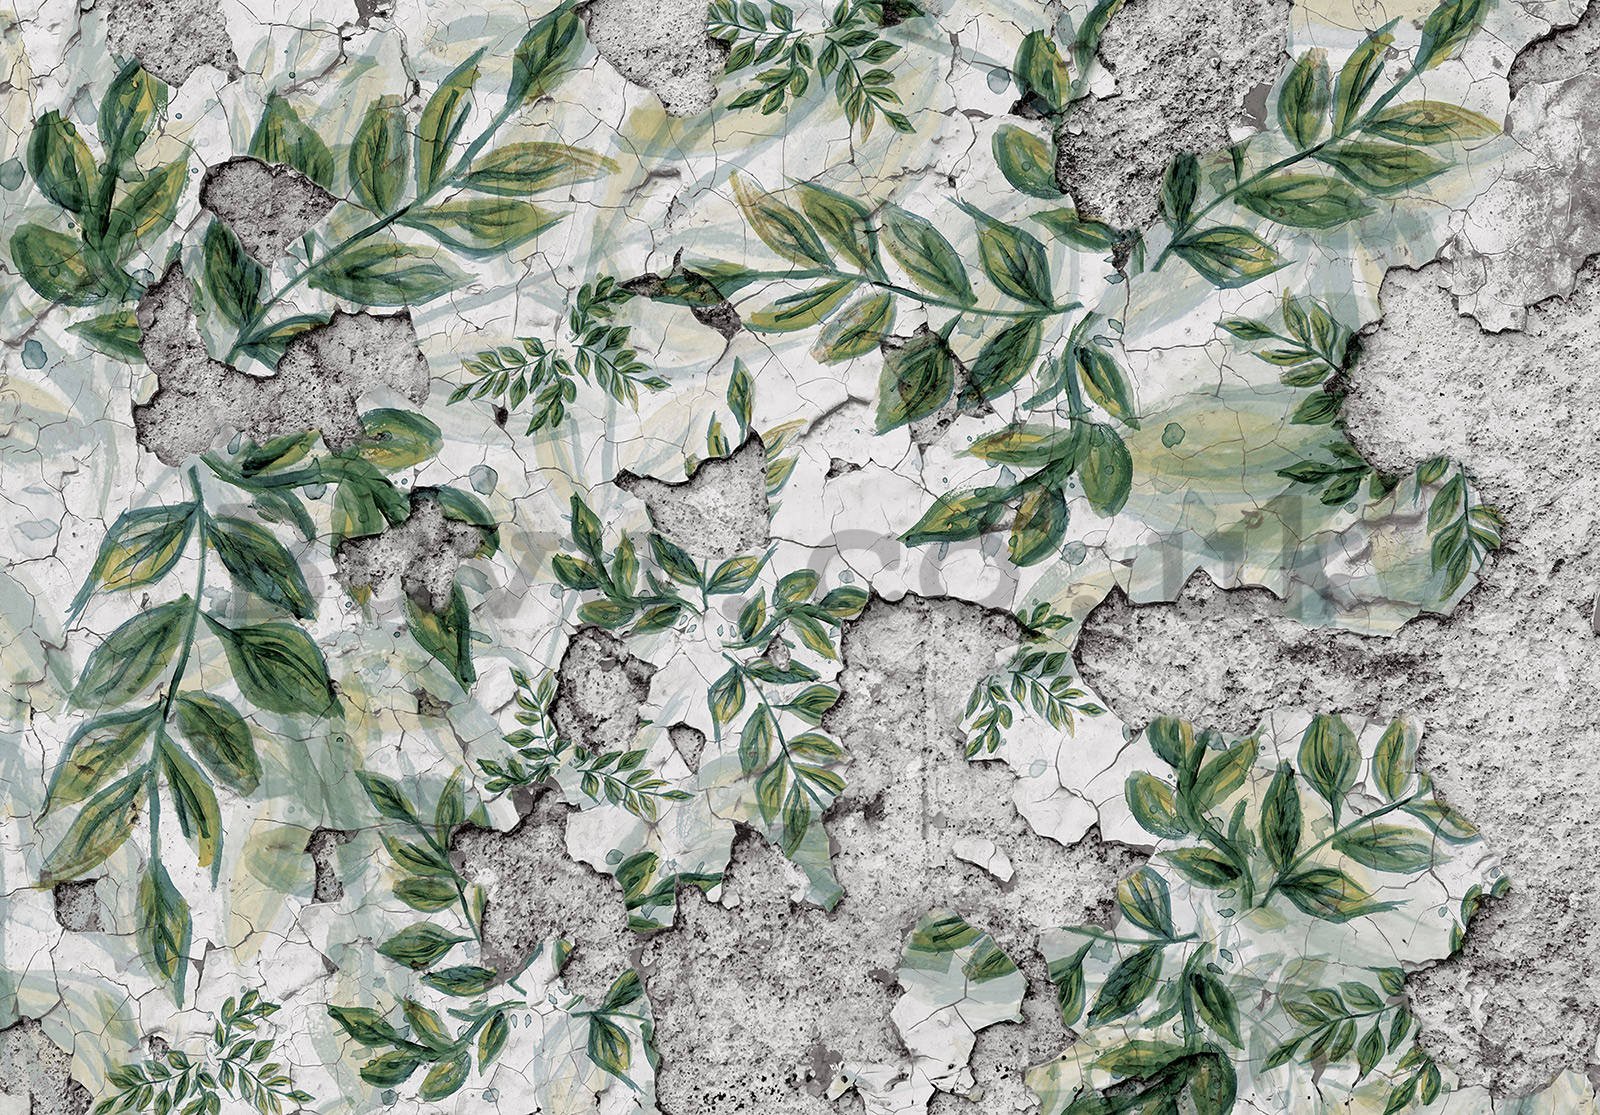 Wall mural vlies: Green leaves on cracked plaster - 254x184 cm